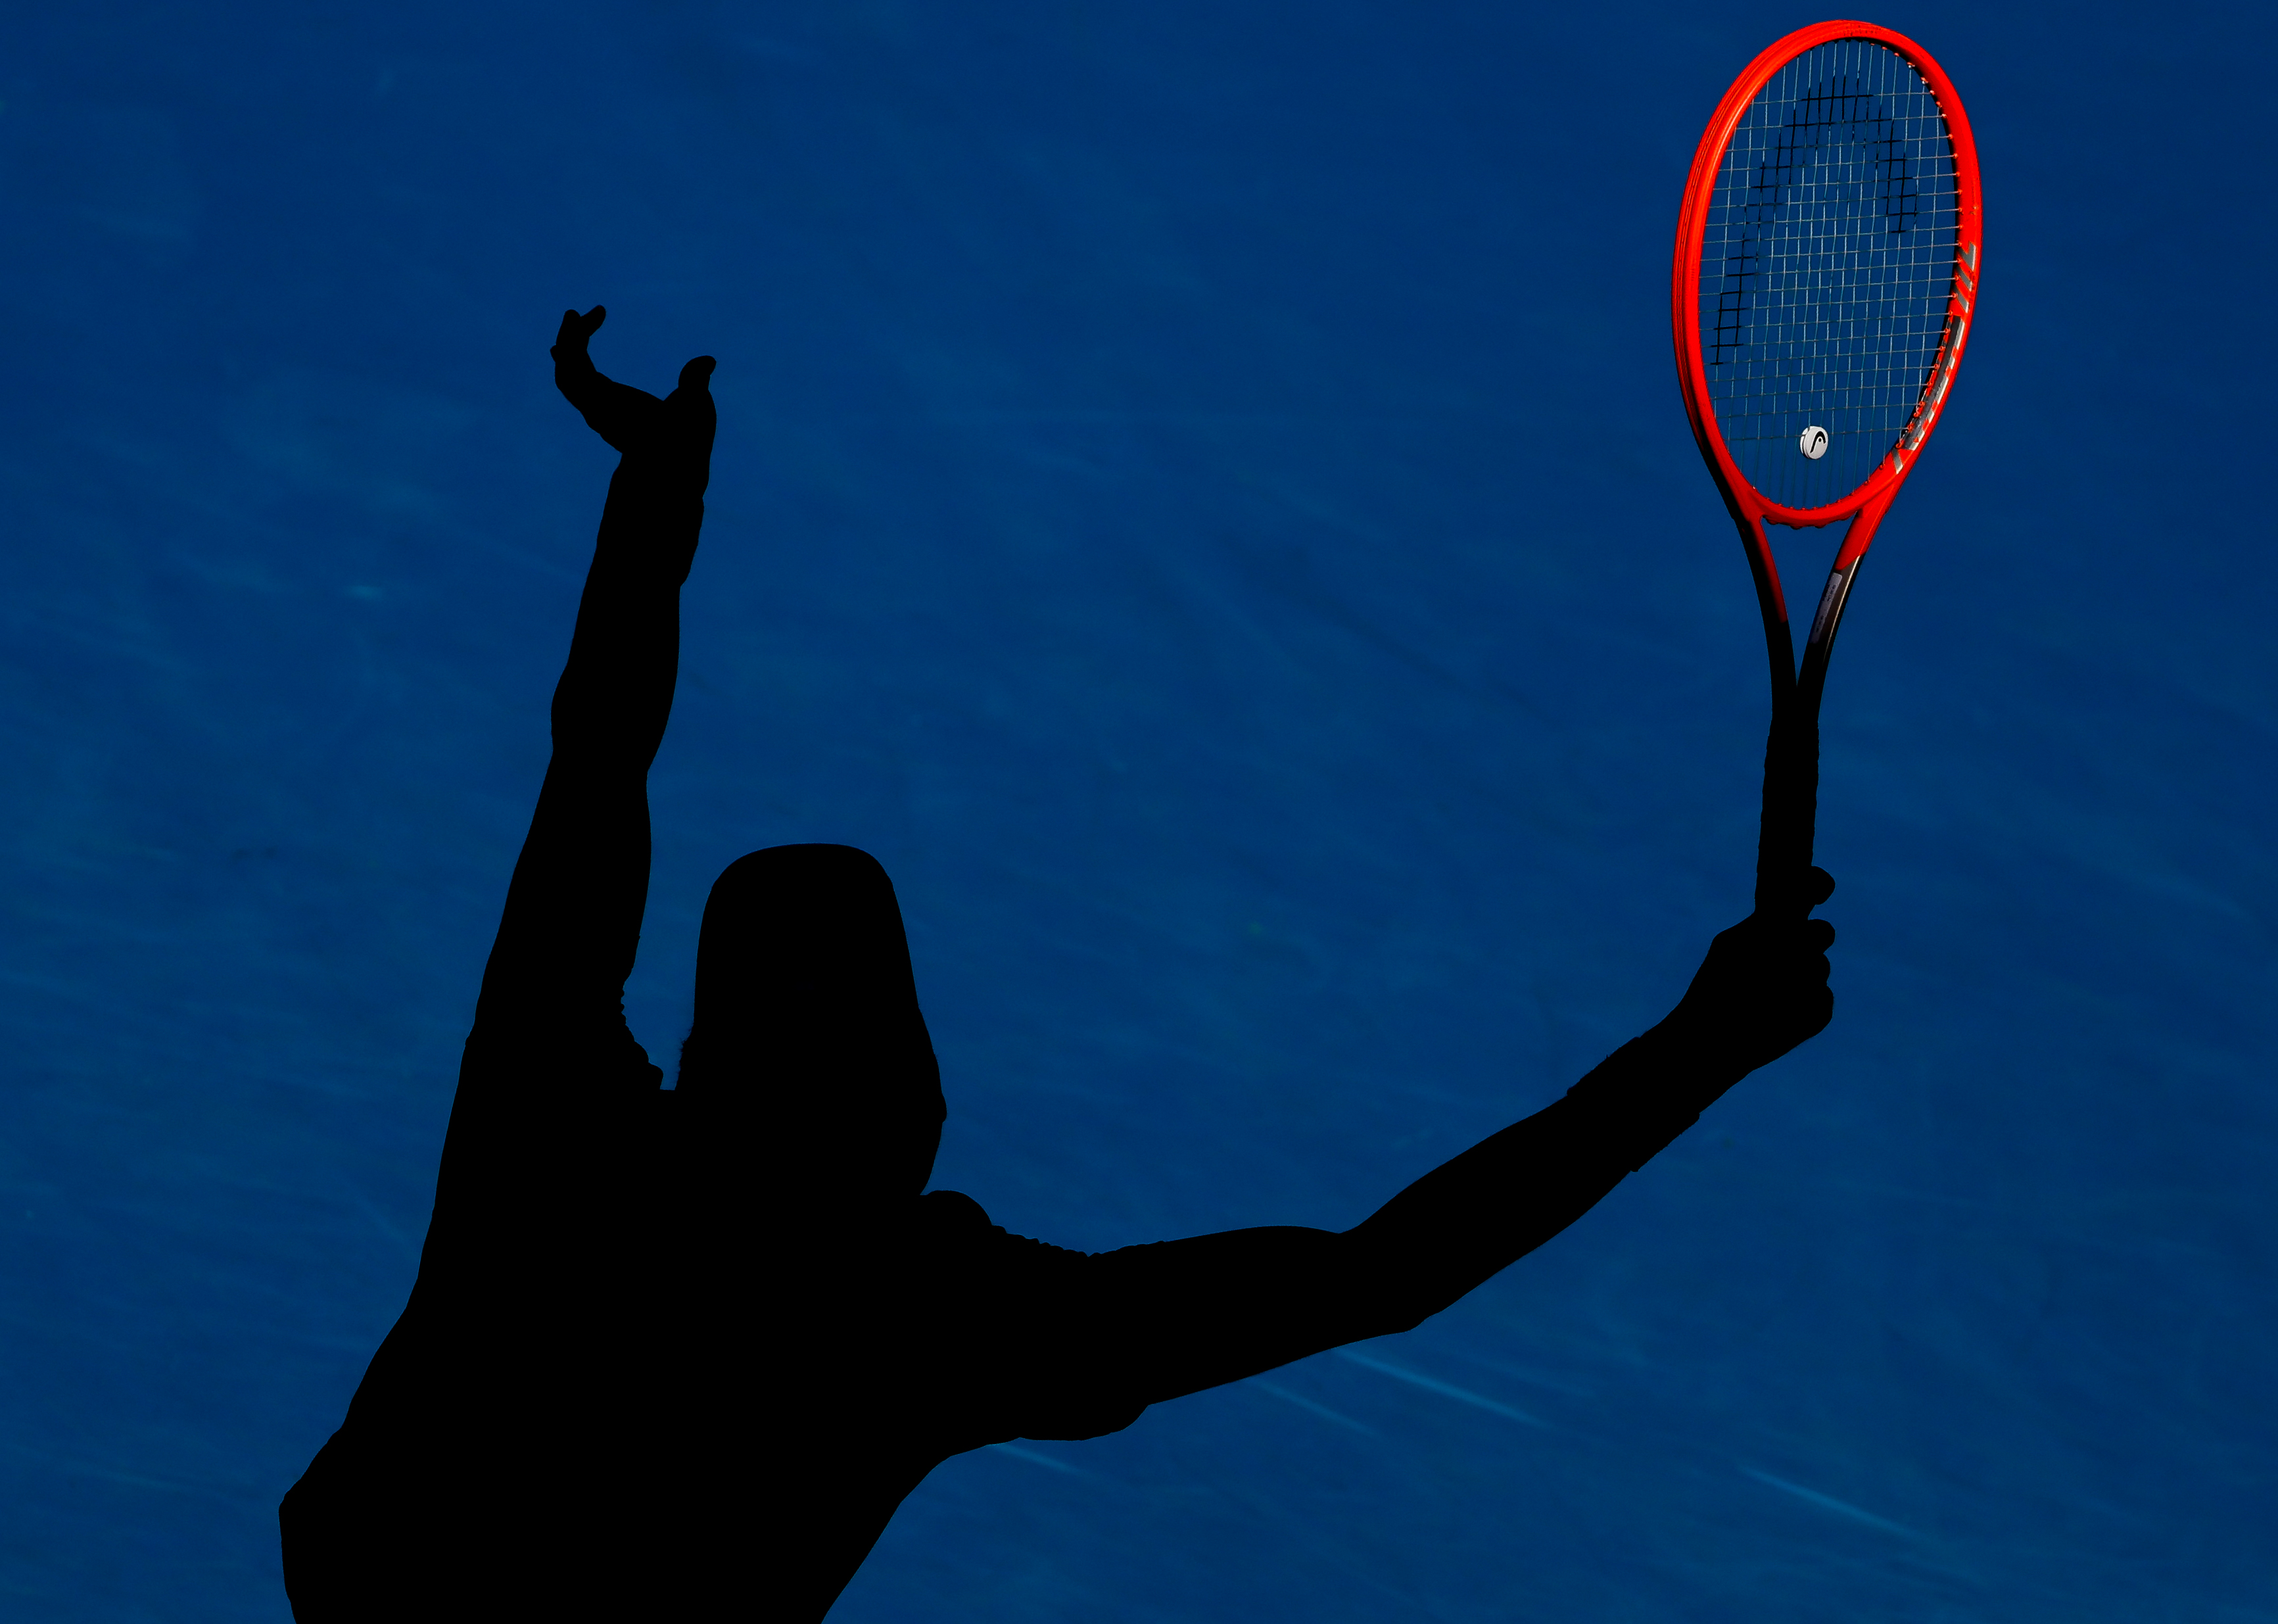 Shadow of a tennis player on the court holding a red racket